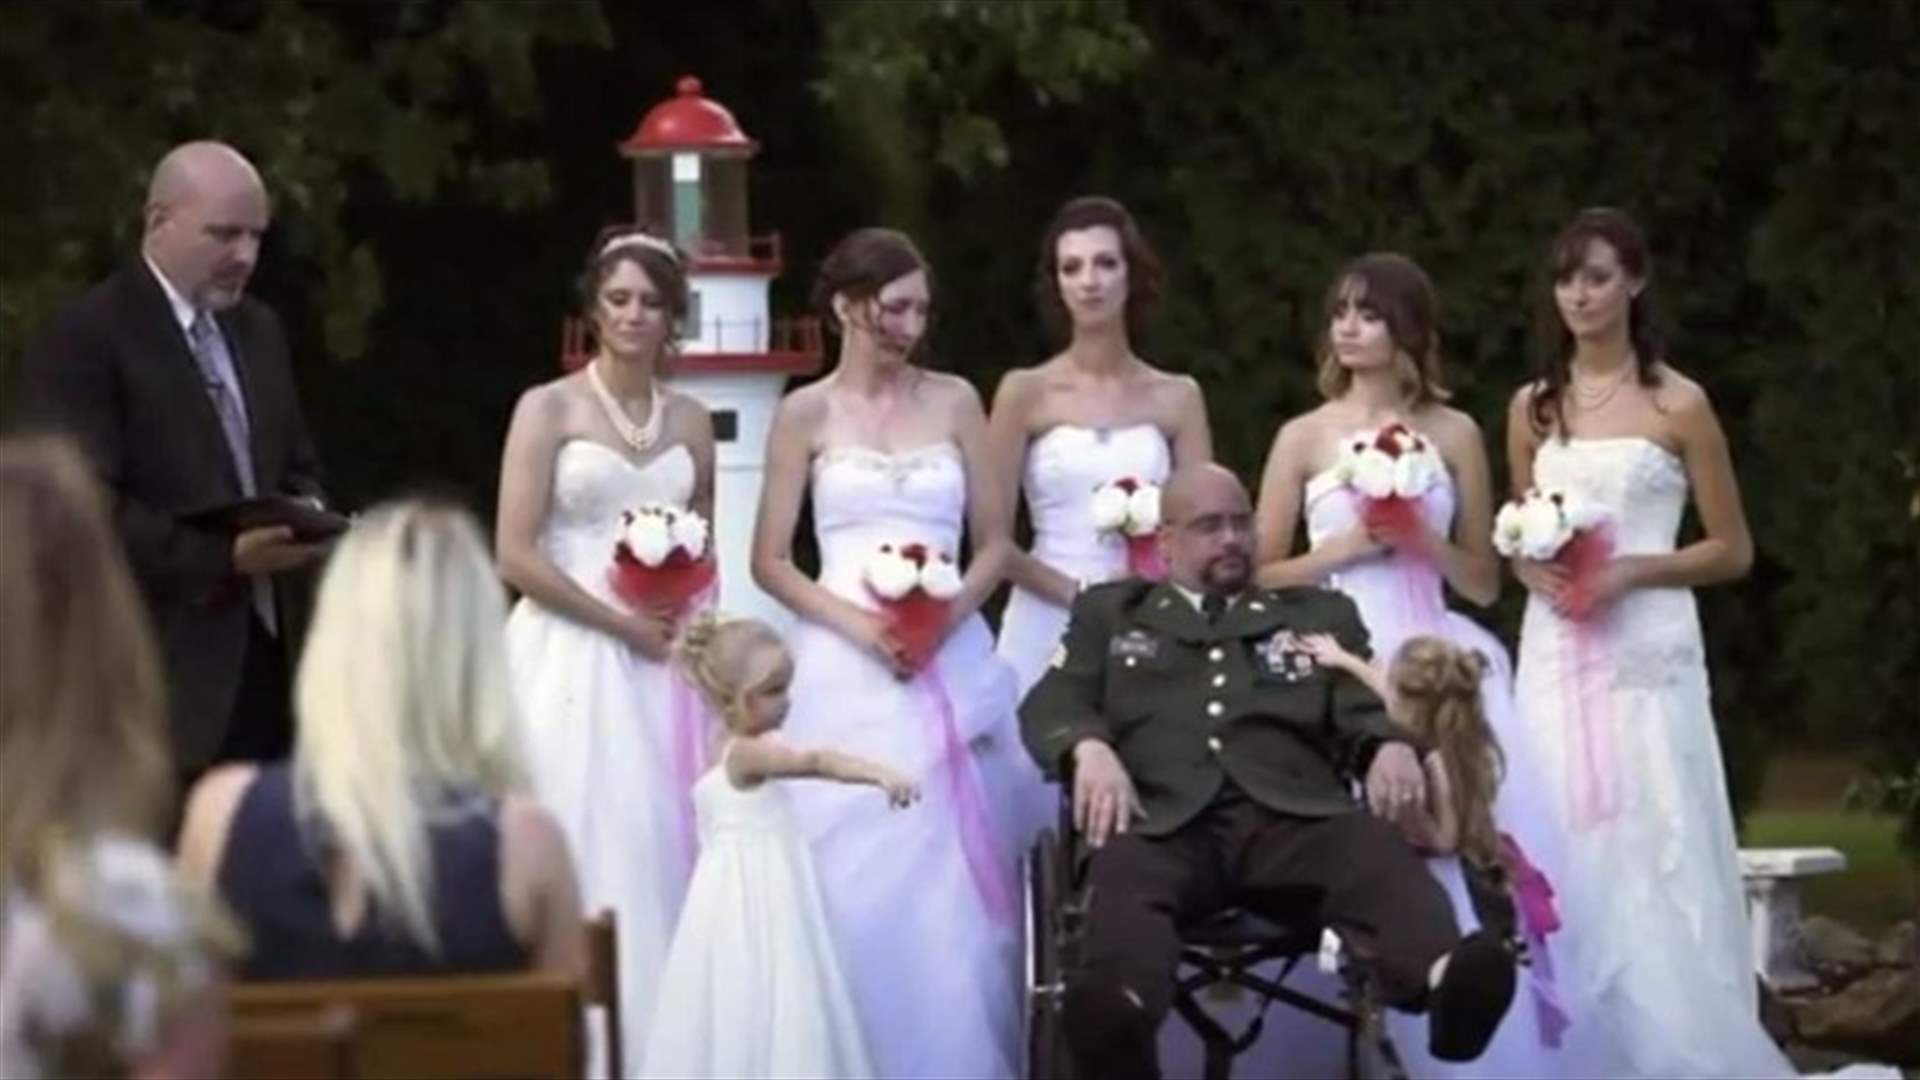 [PHOTOS] Father Fulfills Wish To Walk All His 7 Daughters Down The Aisle